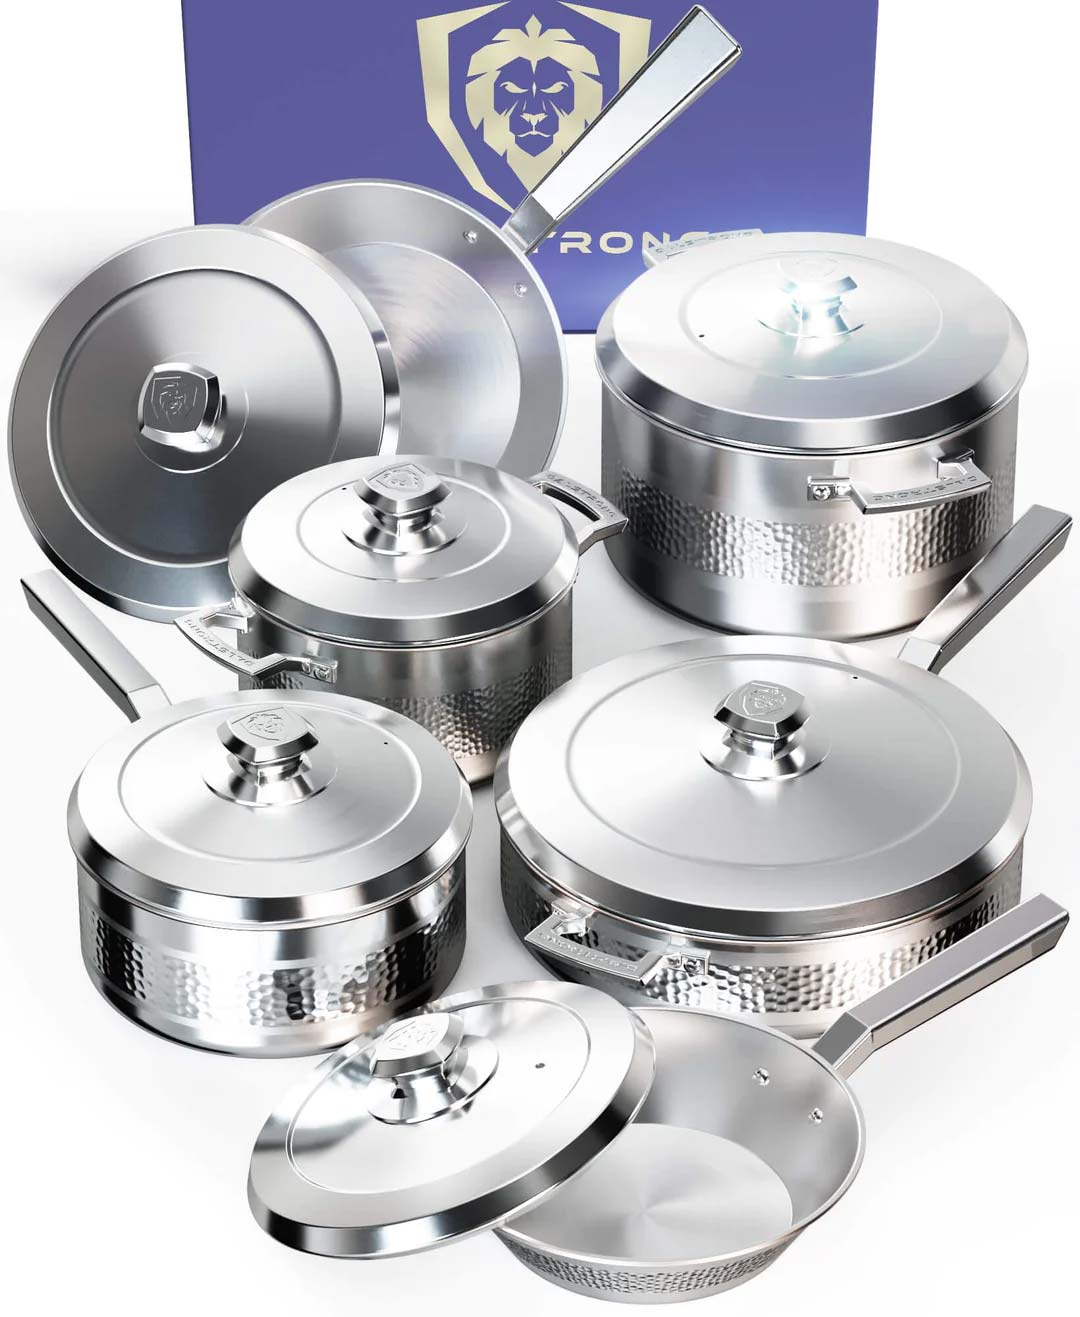 Dalstrong avalon series 12 piece cookware set silver in front of it's premium packaging.